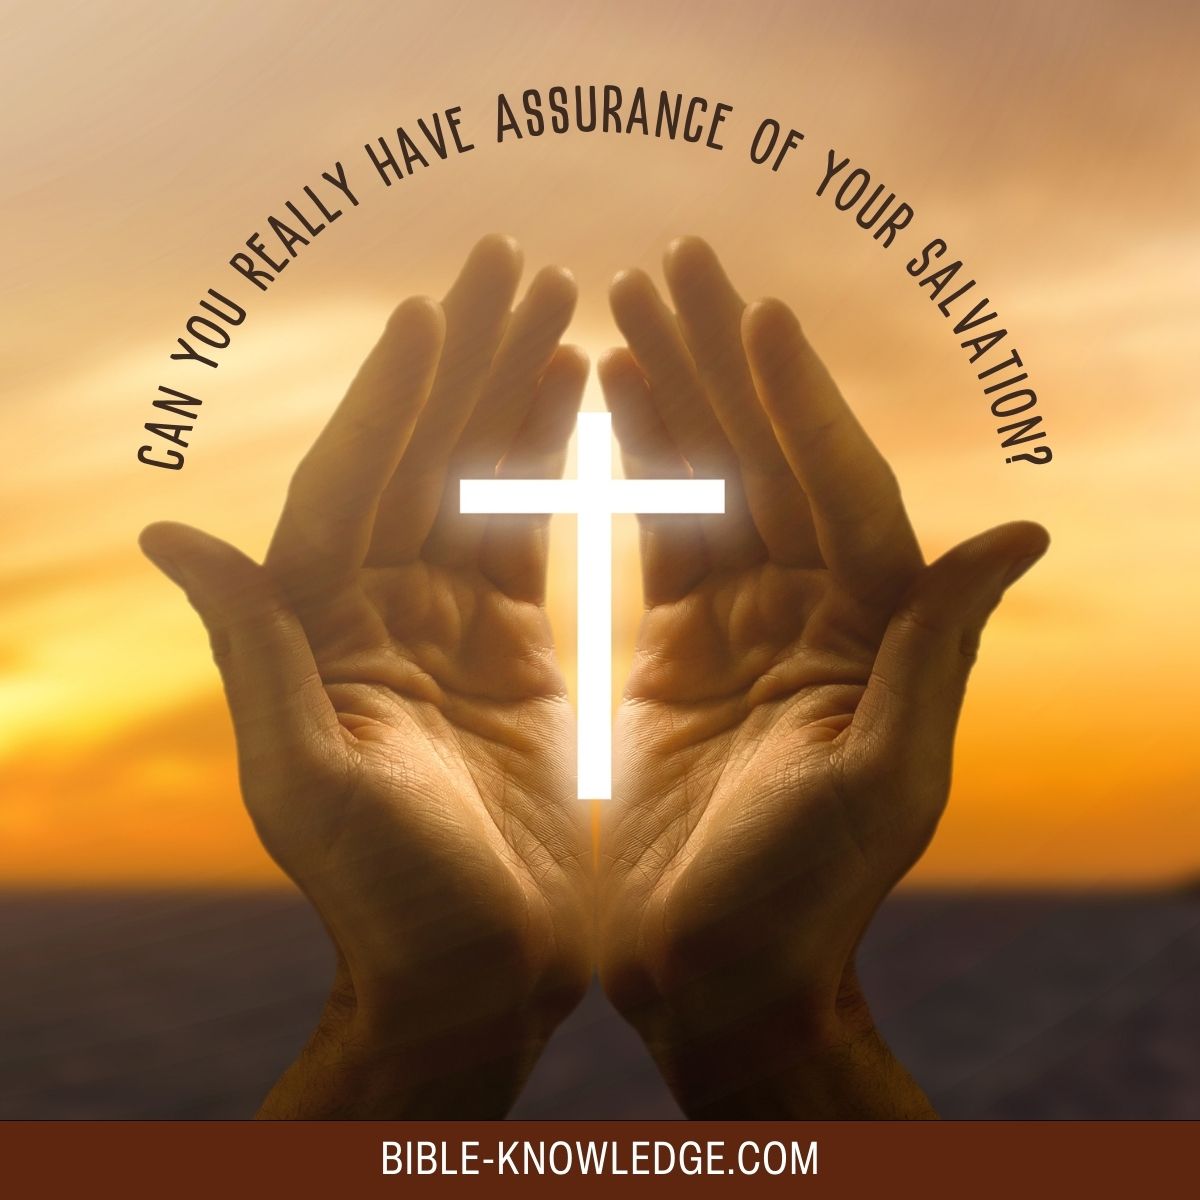 Can You Really Have Assurance of Your Salvation?